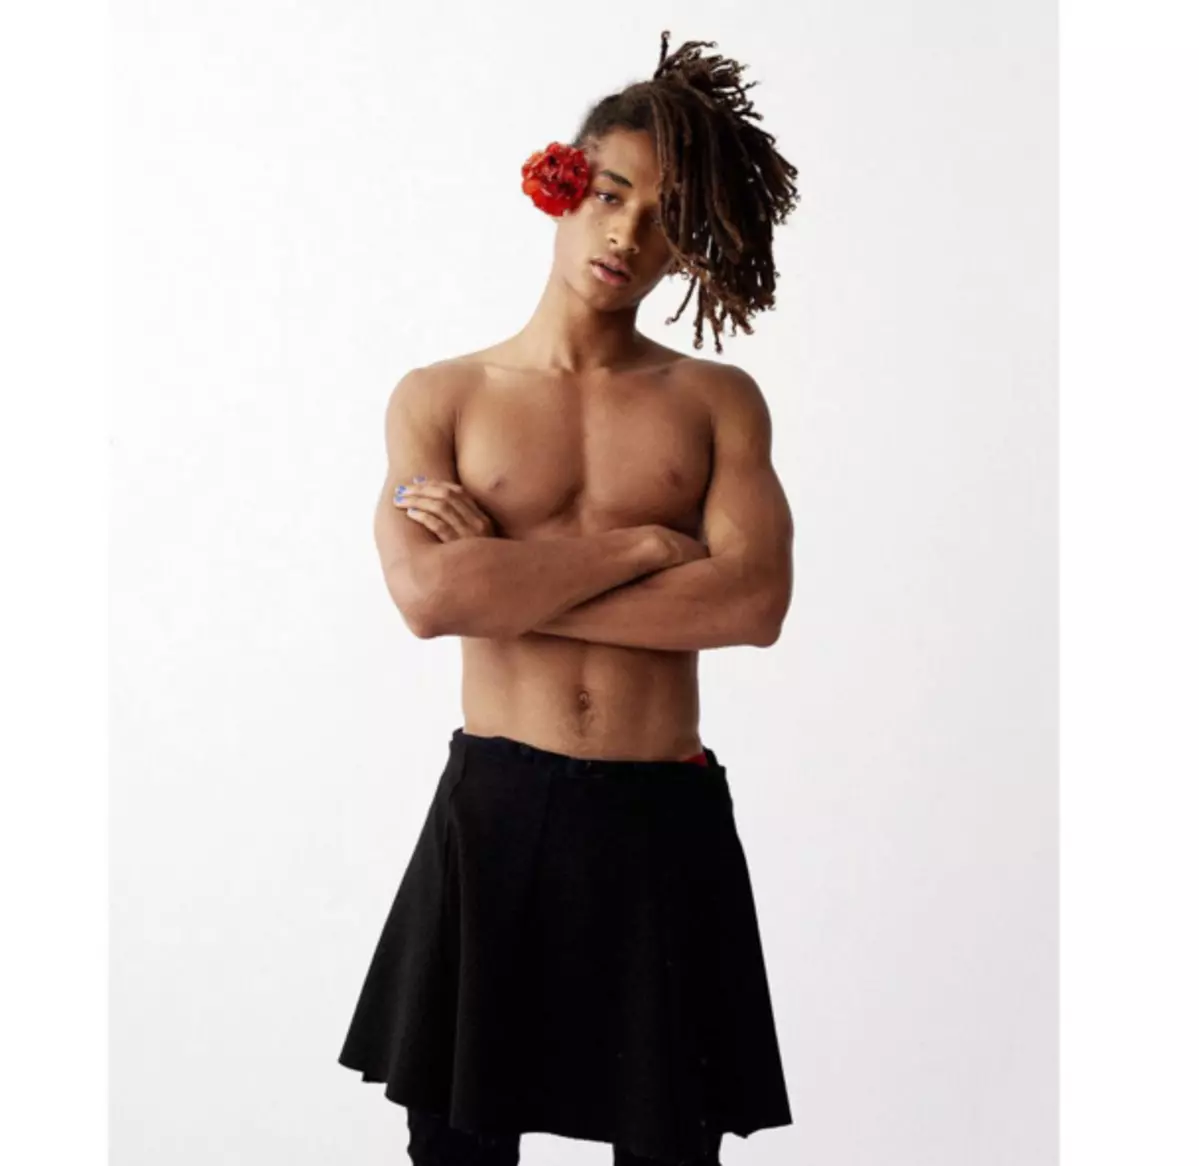 Jaden Smith Does A Photoshoot In Women's Clothing For Vogue Korea